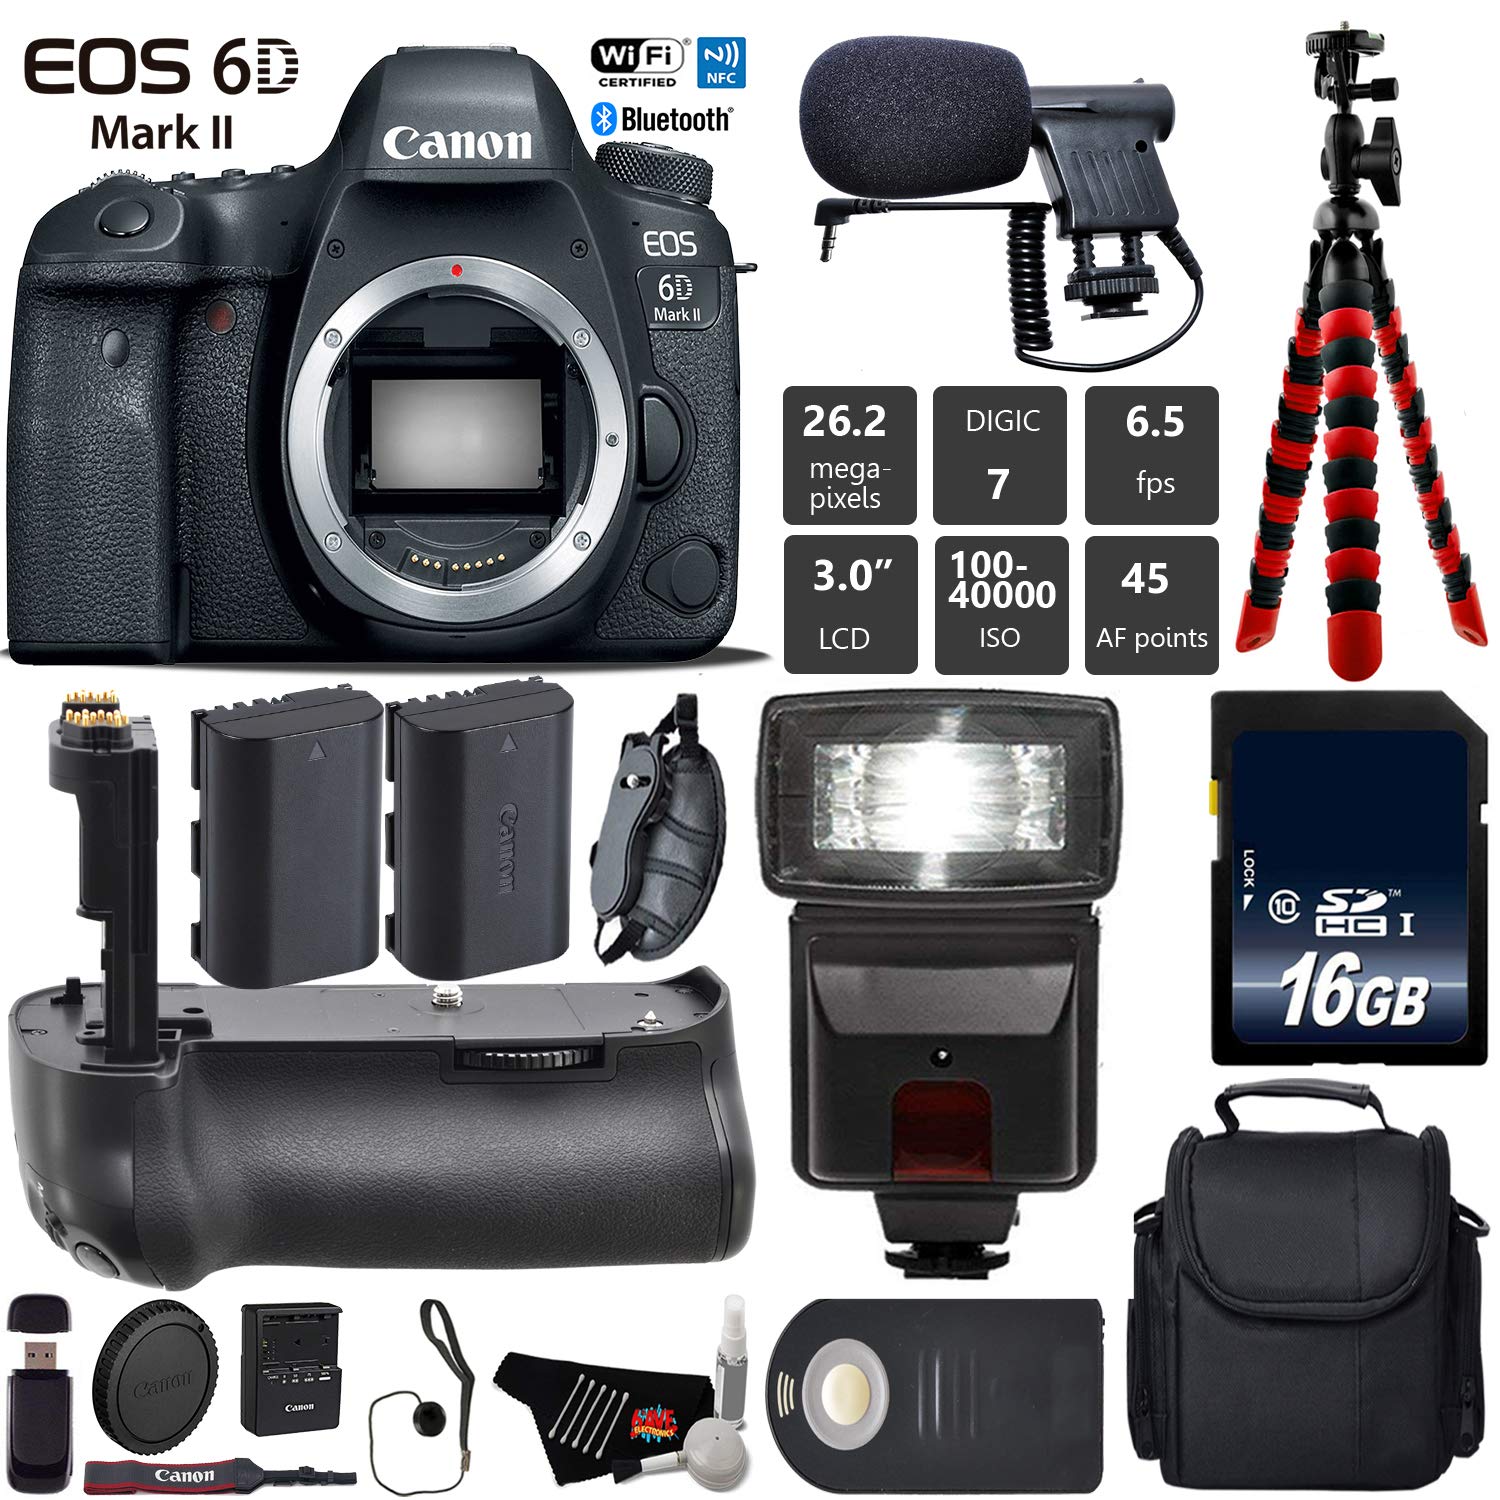 Canon EOS 6D Mark II DSLR Camera (Body Only) + Professional Battery Grip + Condenser Microphone + Flash + Extra Battery Base Bundle